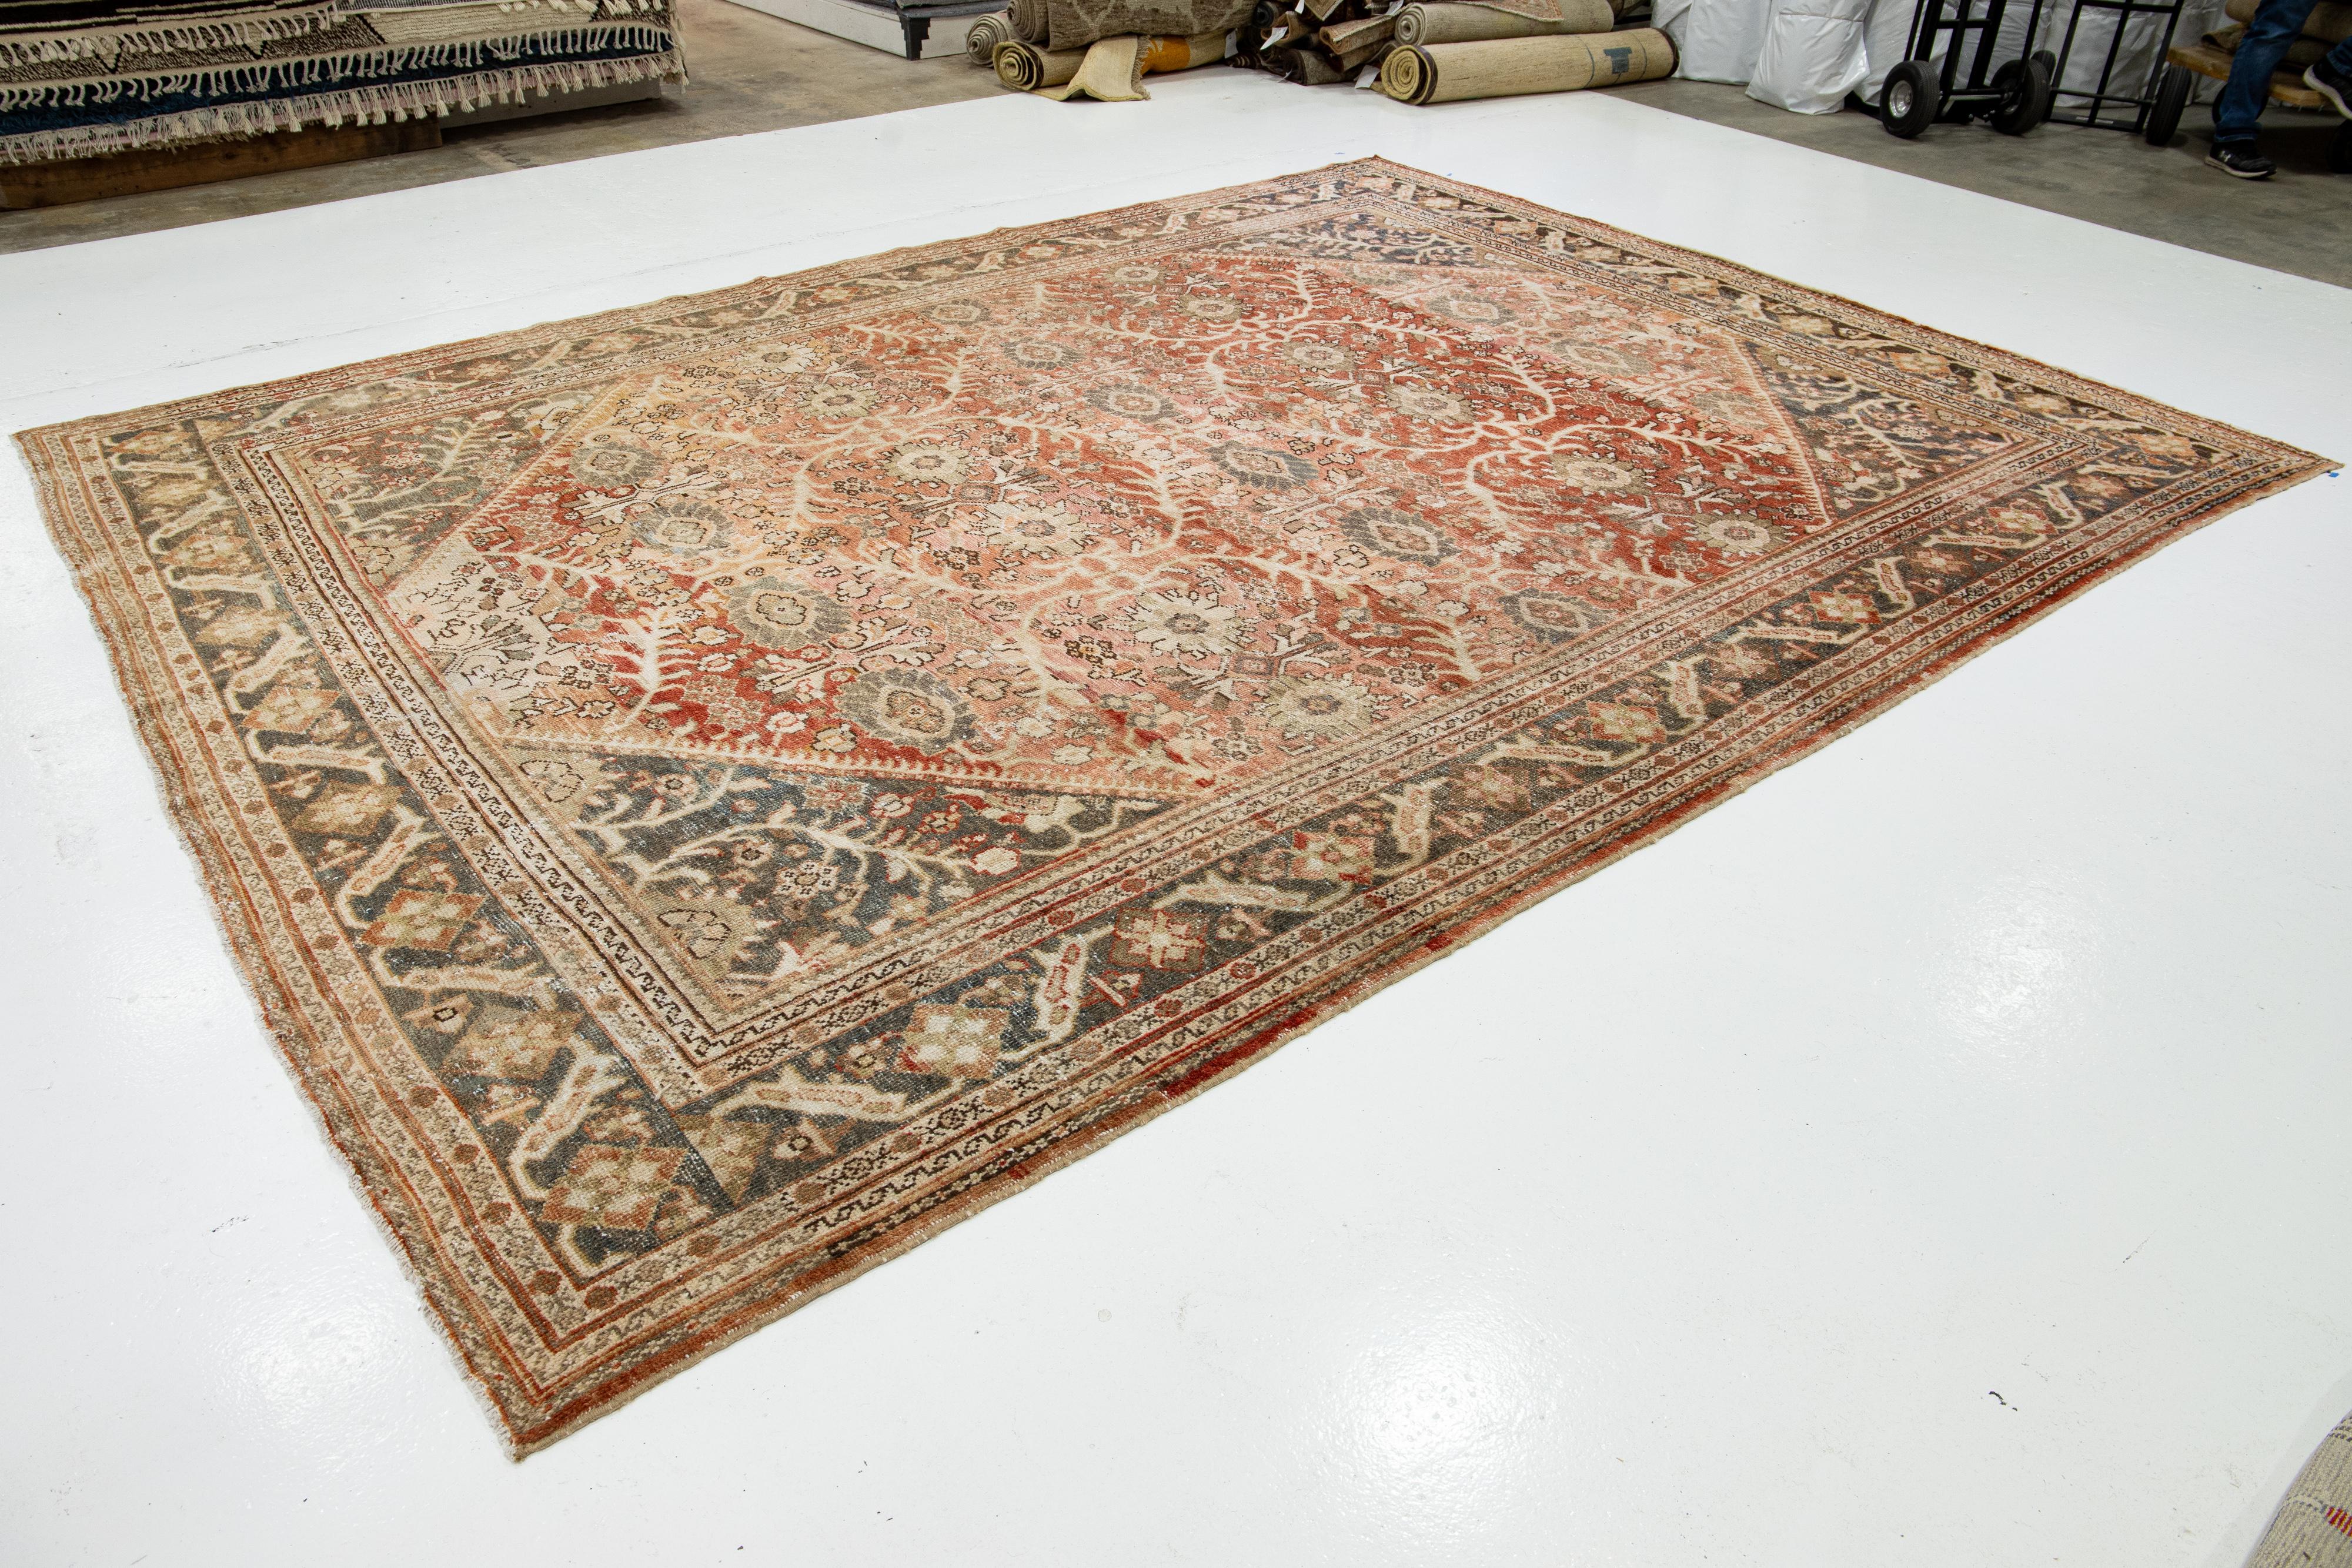 10 x 13 Antique Mahal Wool Rug In Rust Color with Allover Motif In Good Condition For Sale In Norwalk, CT